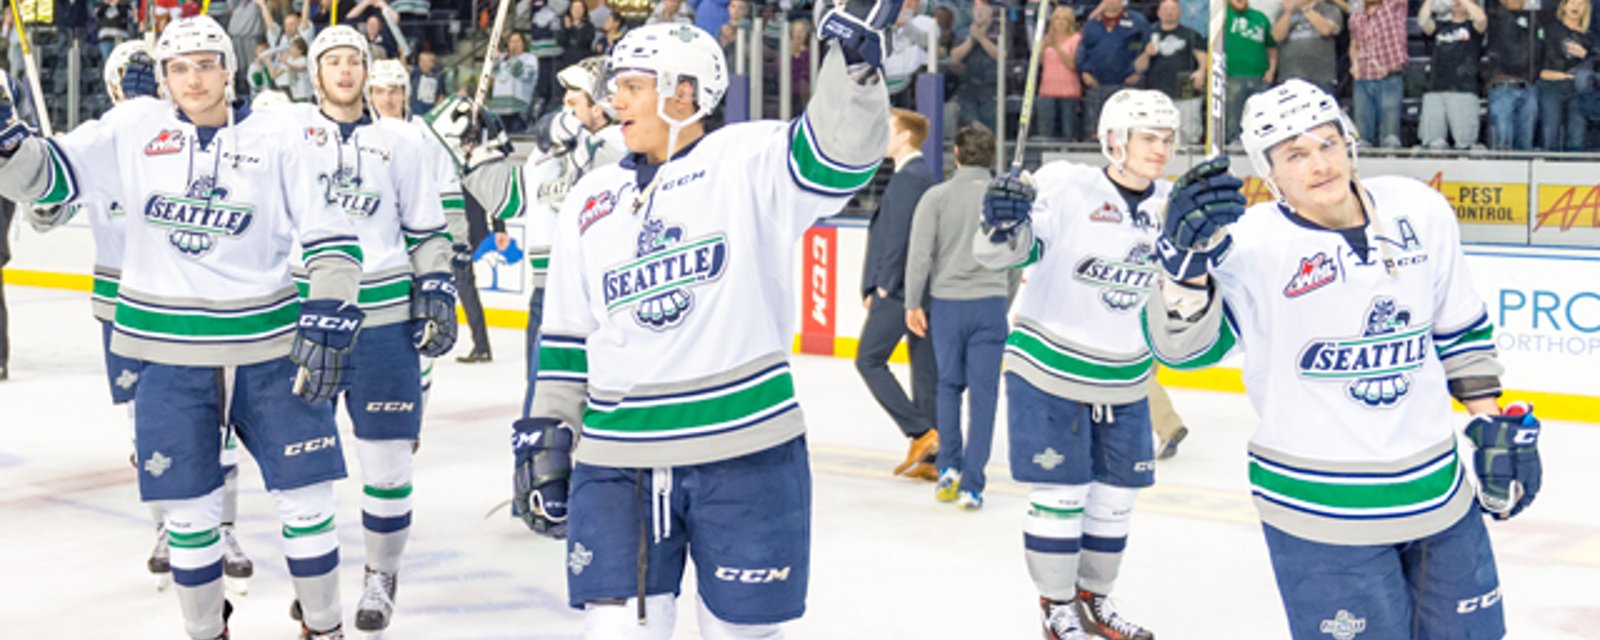 2 WHL players banned in Seattle after racial-taunting incident involving Black teammate